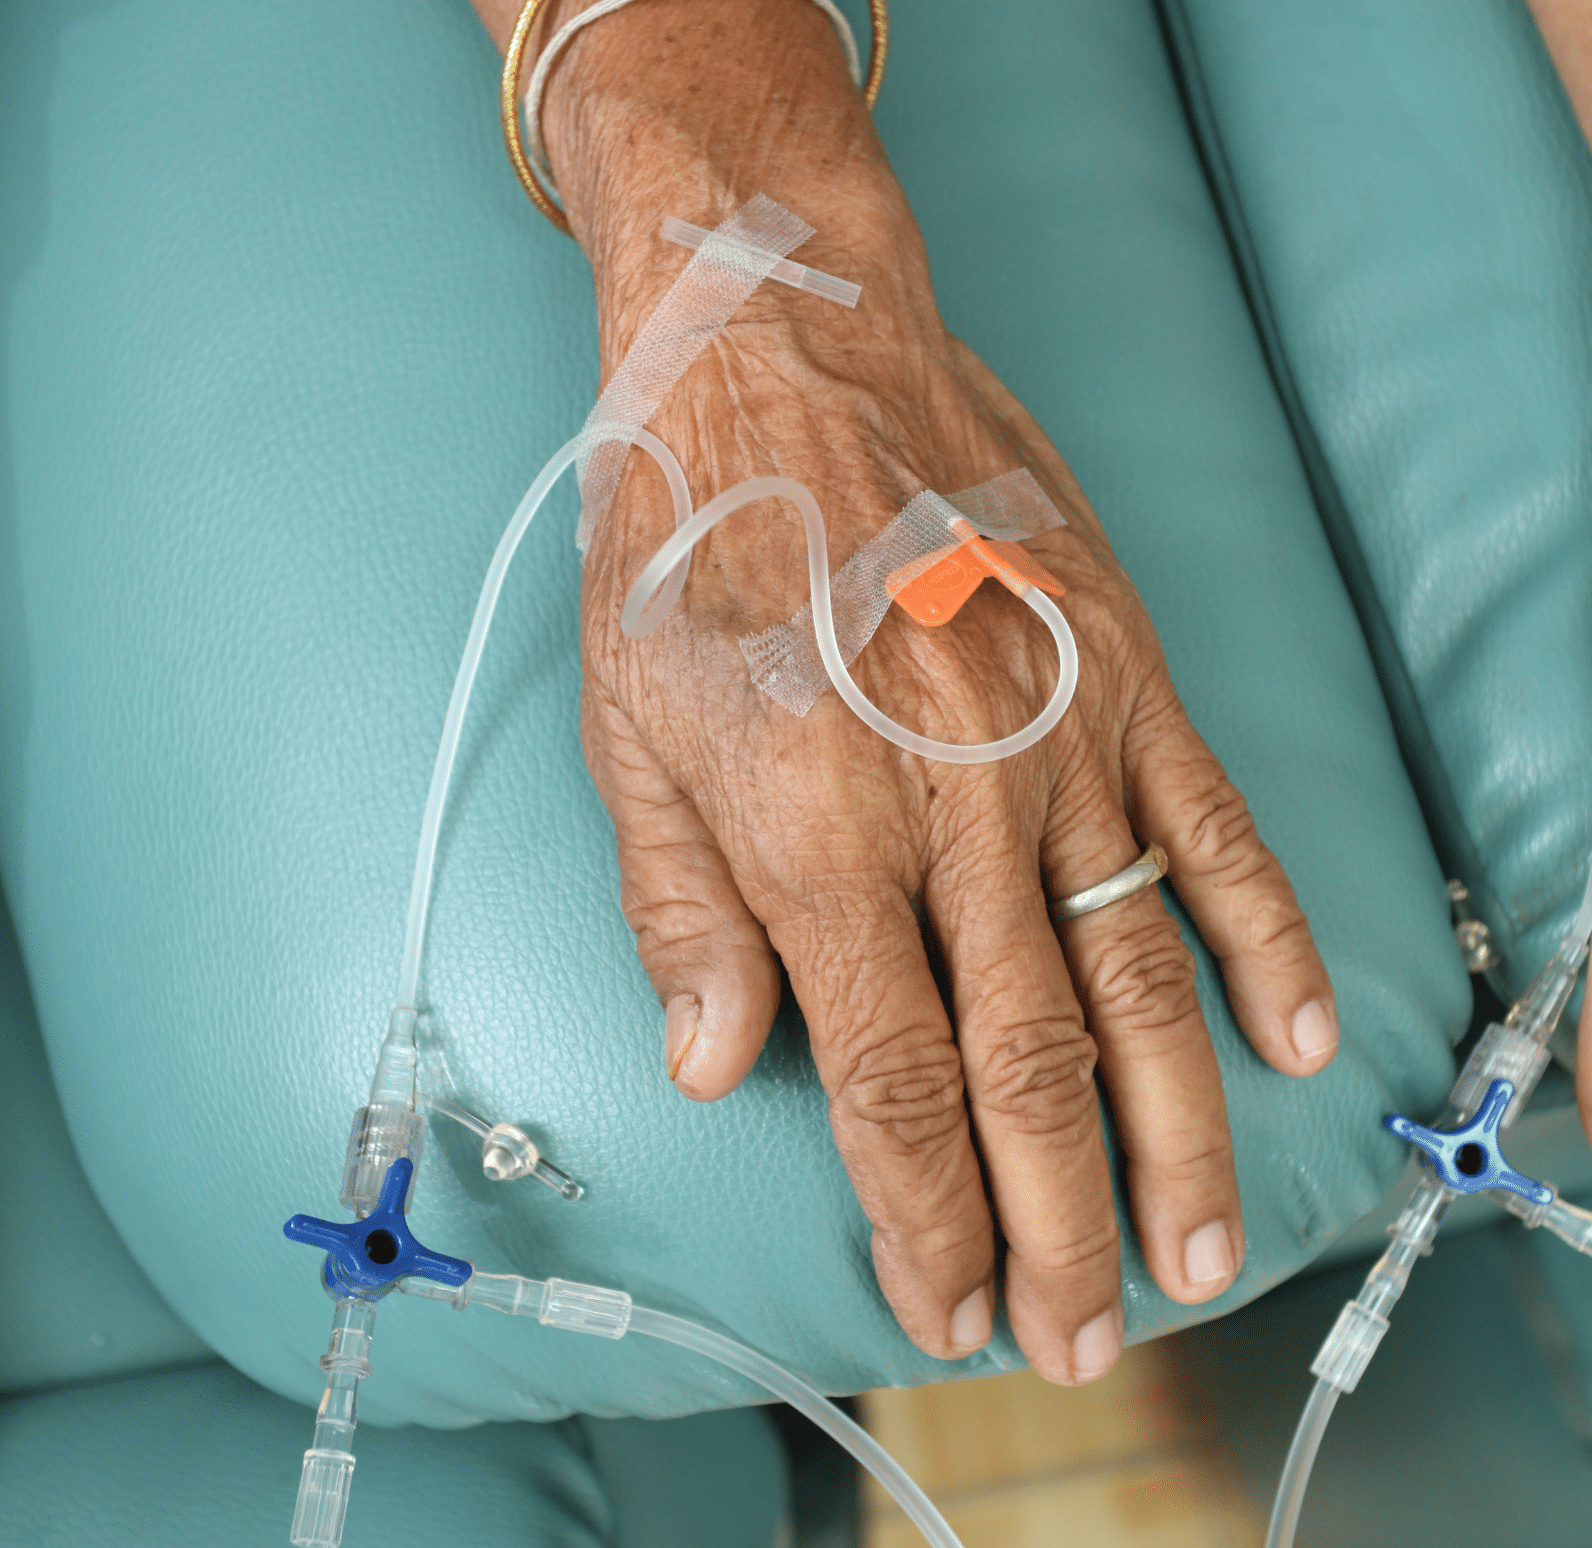 IV access via dorsal arch veins on the back of the hand